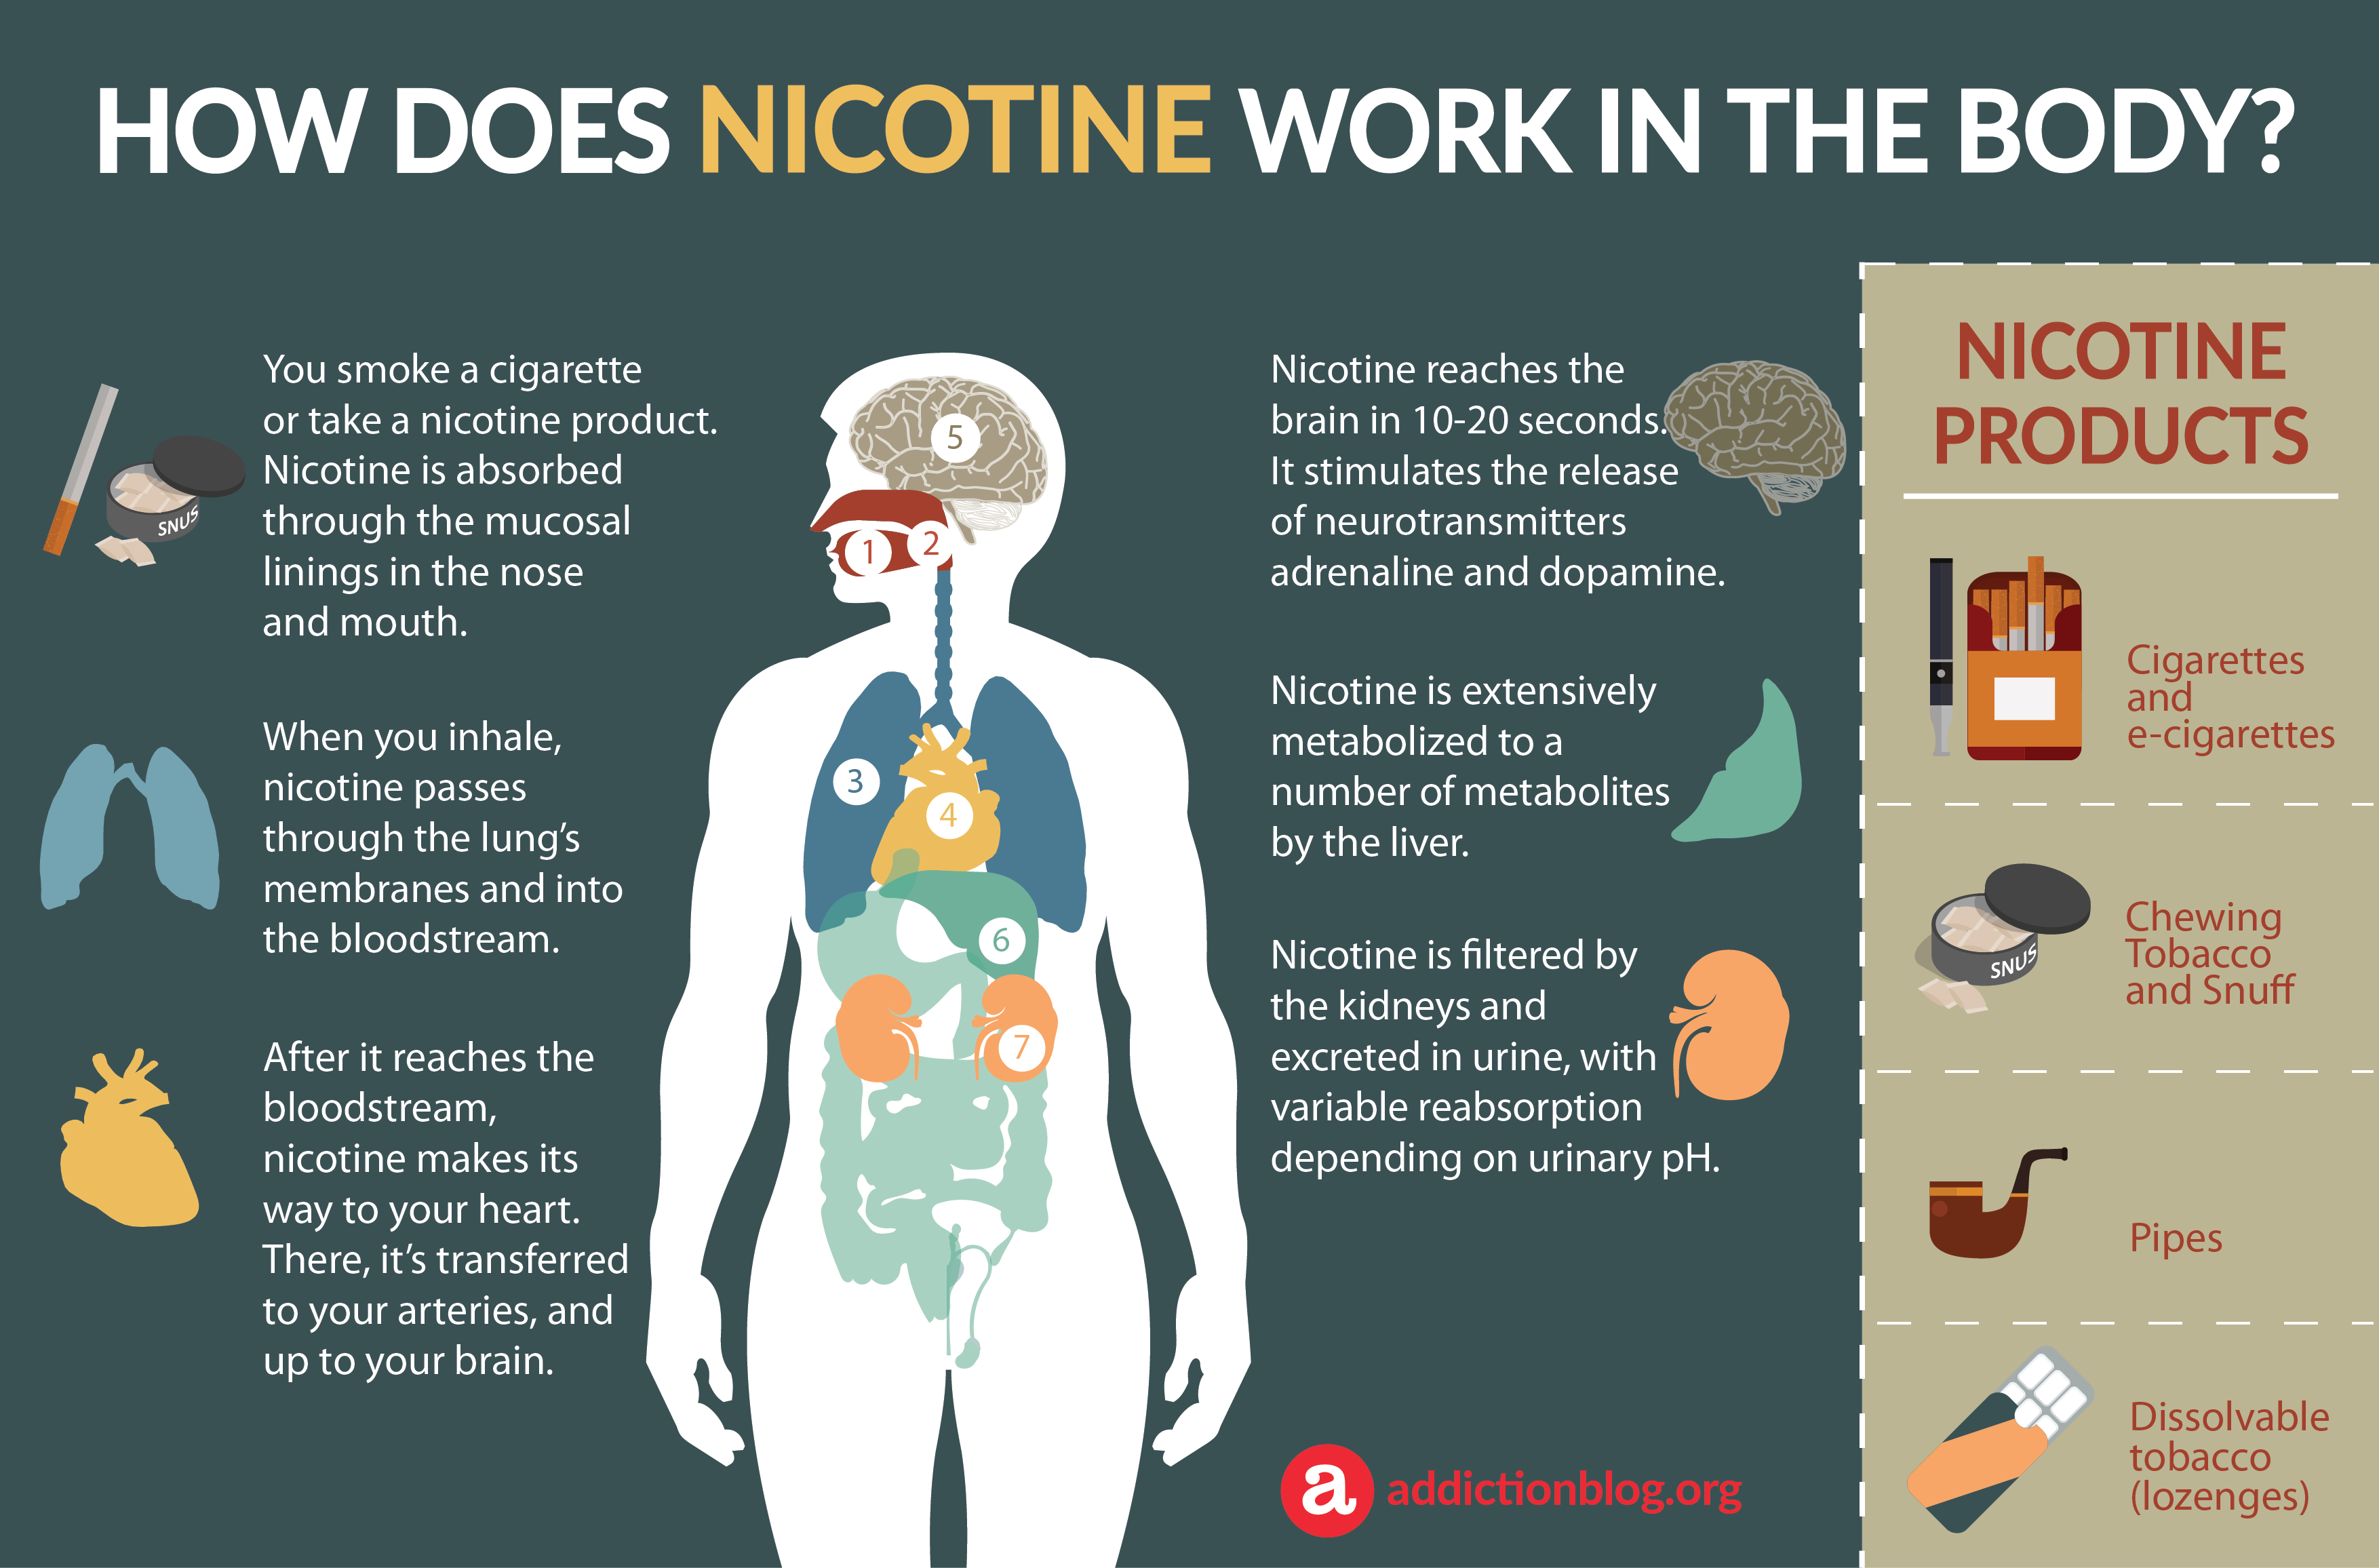 Nicotine Metabolism in the Body: How Nicotine Affects the Brain (INFOGRAPHIC)